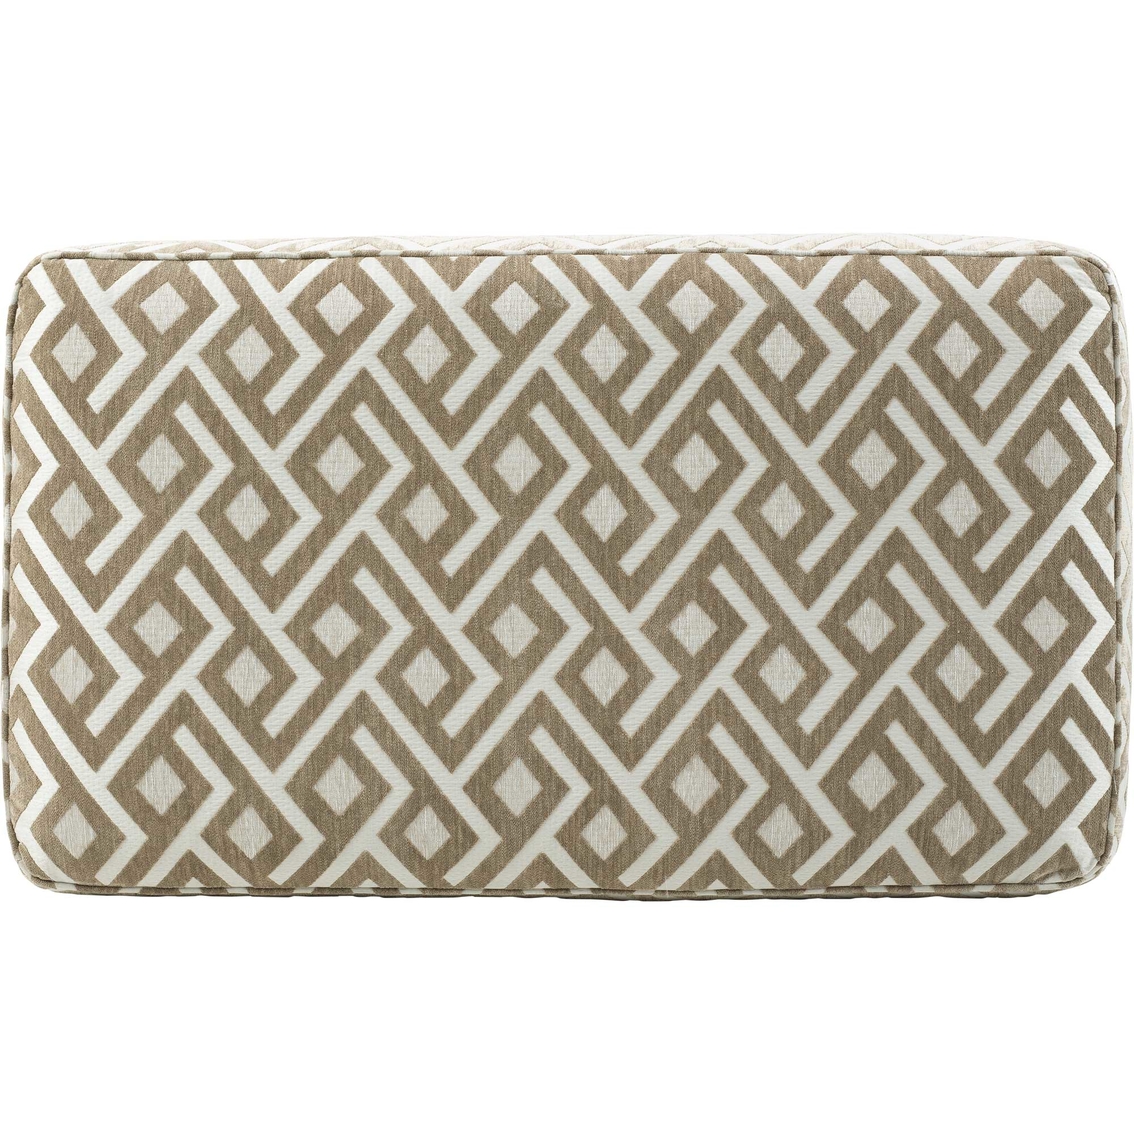 Signature Design by Ashley Dovemont Oversized Accent Ottoman - Image 3 of 4